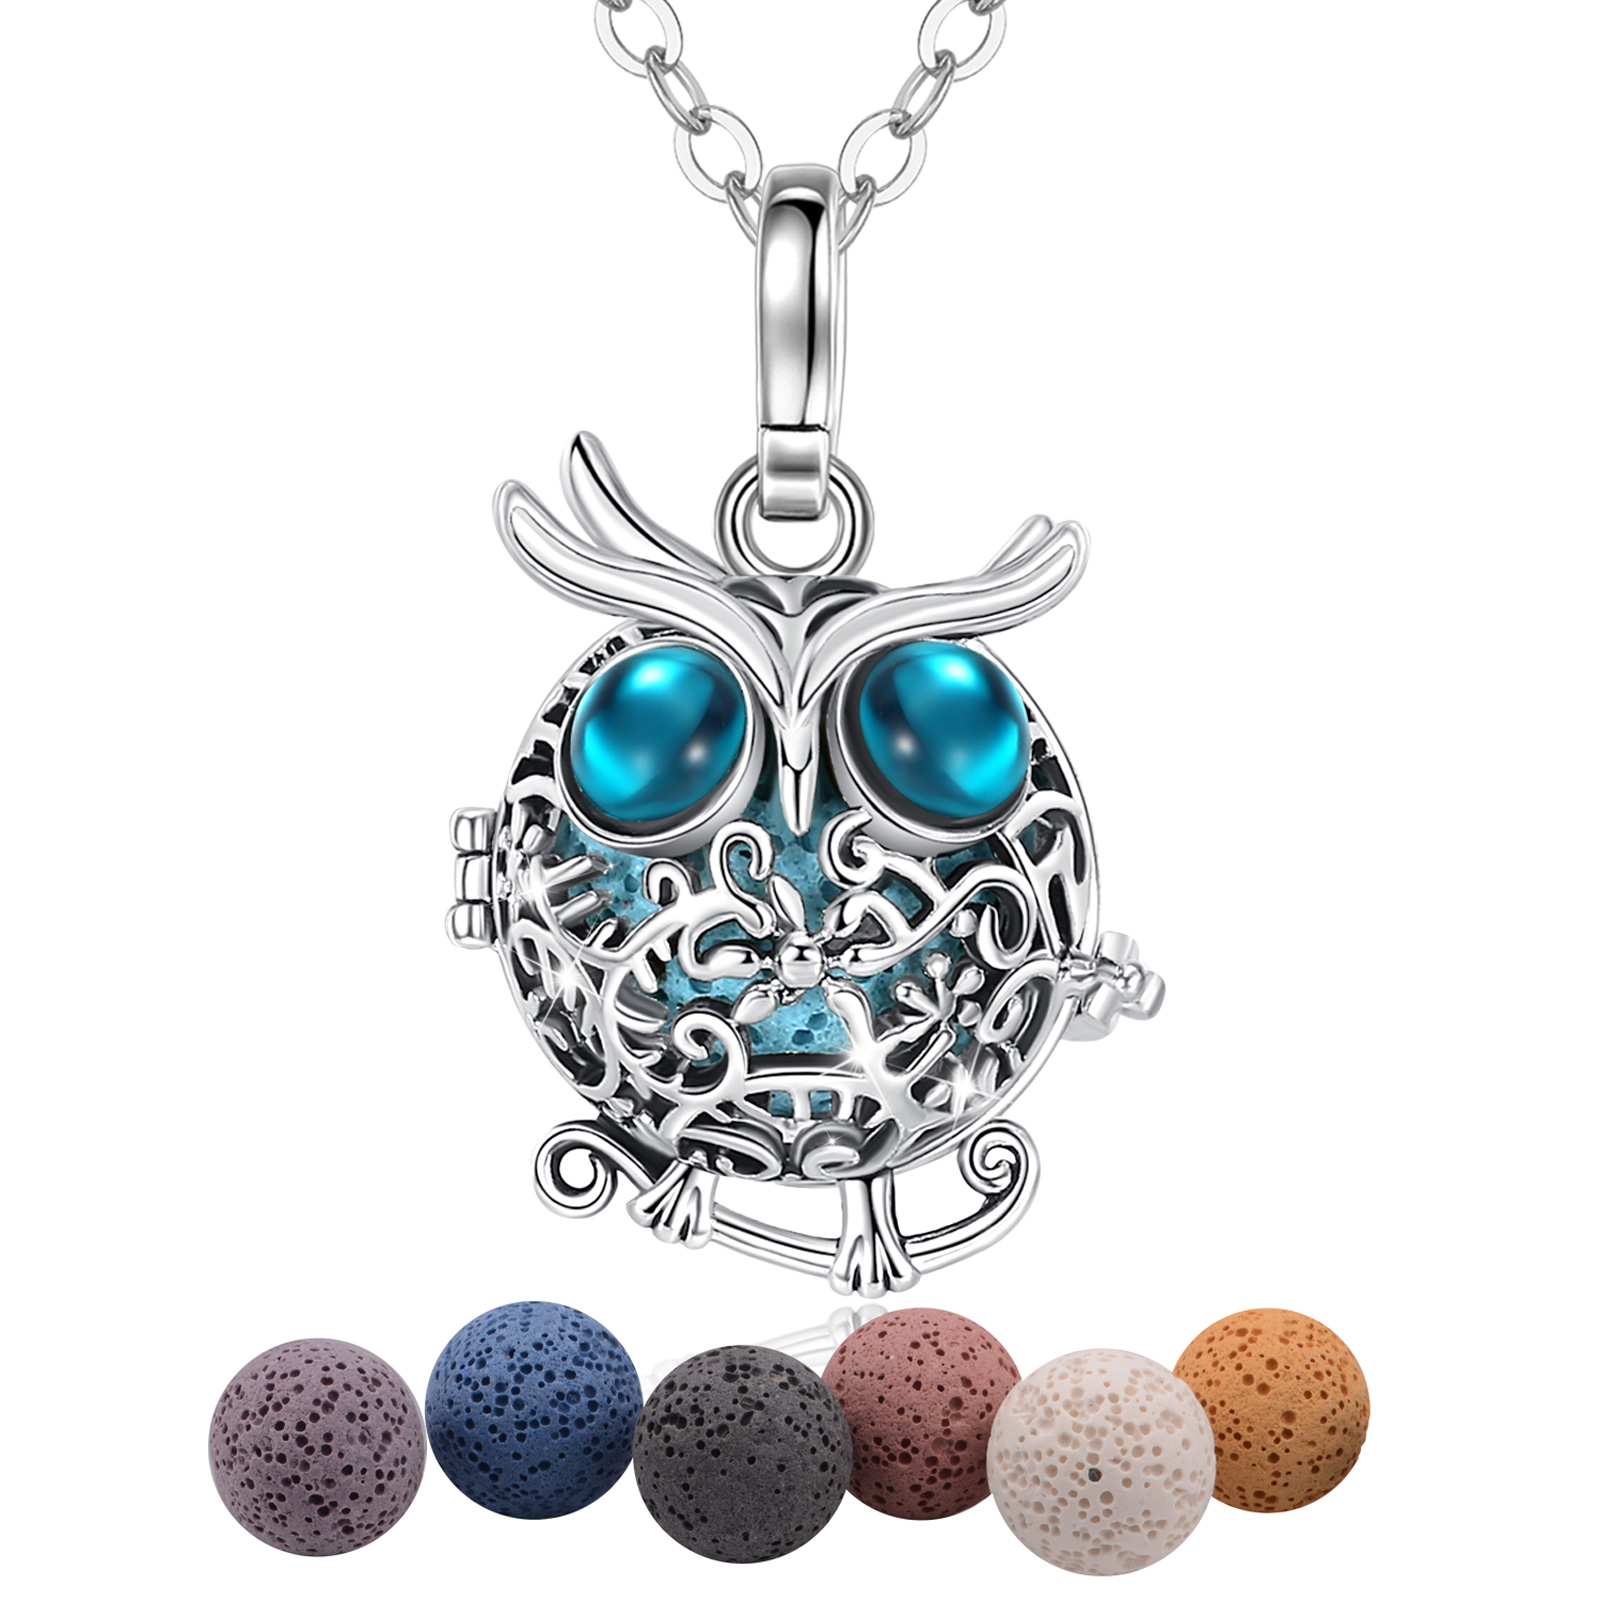 Merryshine Jewelry S925 Sterling Silver Lava Stone Cage Diffuser Vintage Style Owl Pendant Necklace